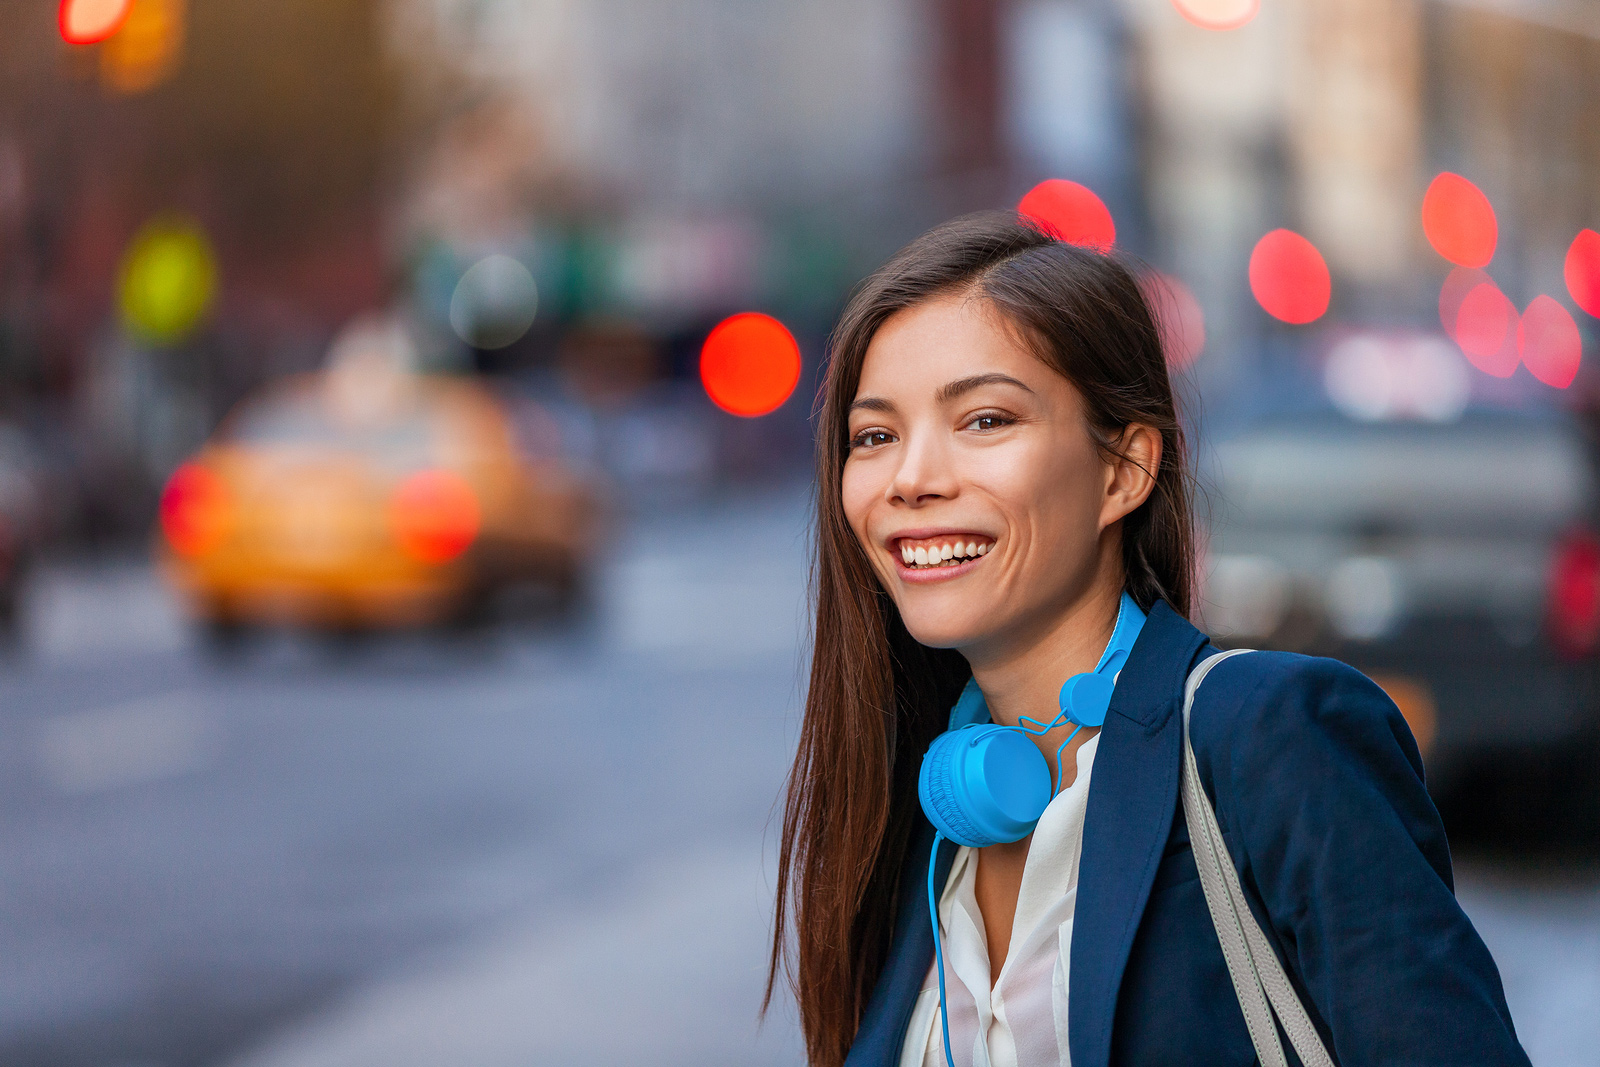 Young professional Asian woman wearing headphones in the city of Baltimore, MD | Treatment for Sexual Assault | Therapy for Sexual Assault | Counseling | Mental health help 21210" width="300" height="200"